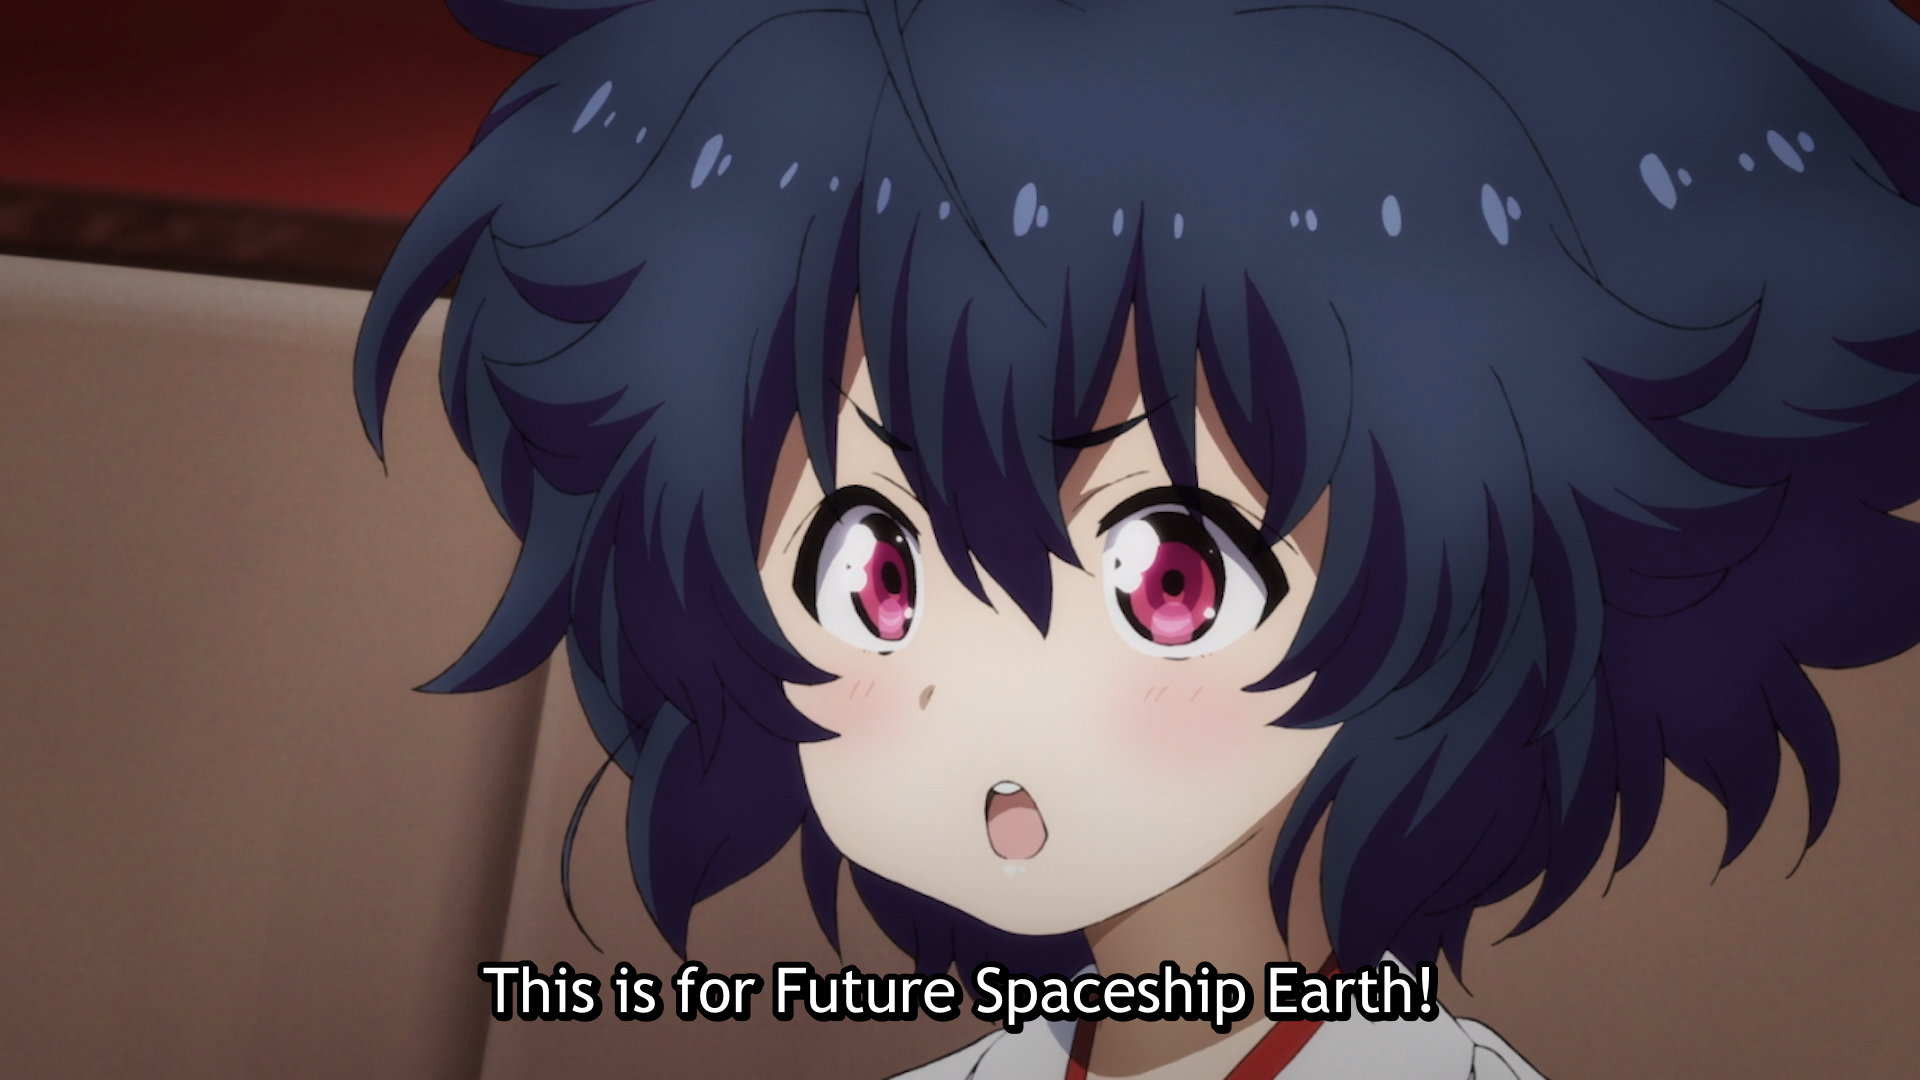 Sara Garando expounds on one of her many hare-brained, science fiction-inspired speculations in a scene from the 2019 ISLAND TV anime.